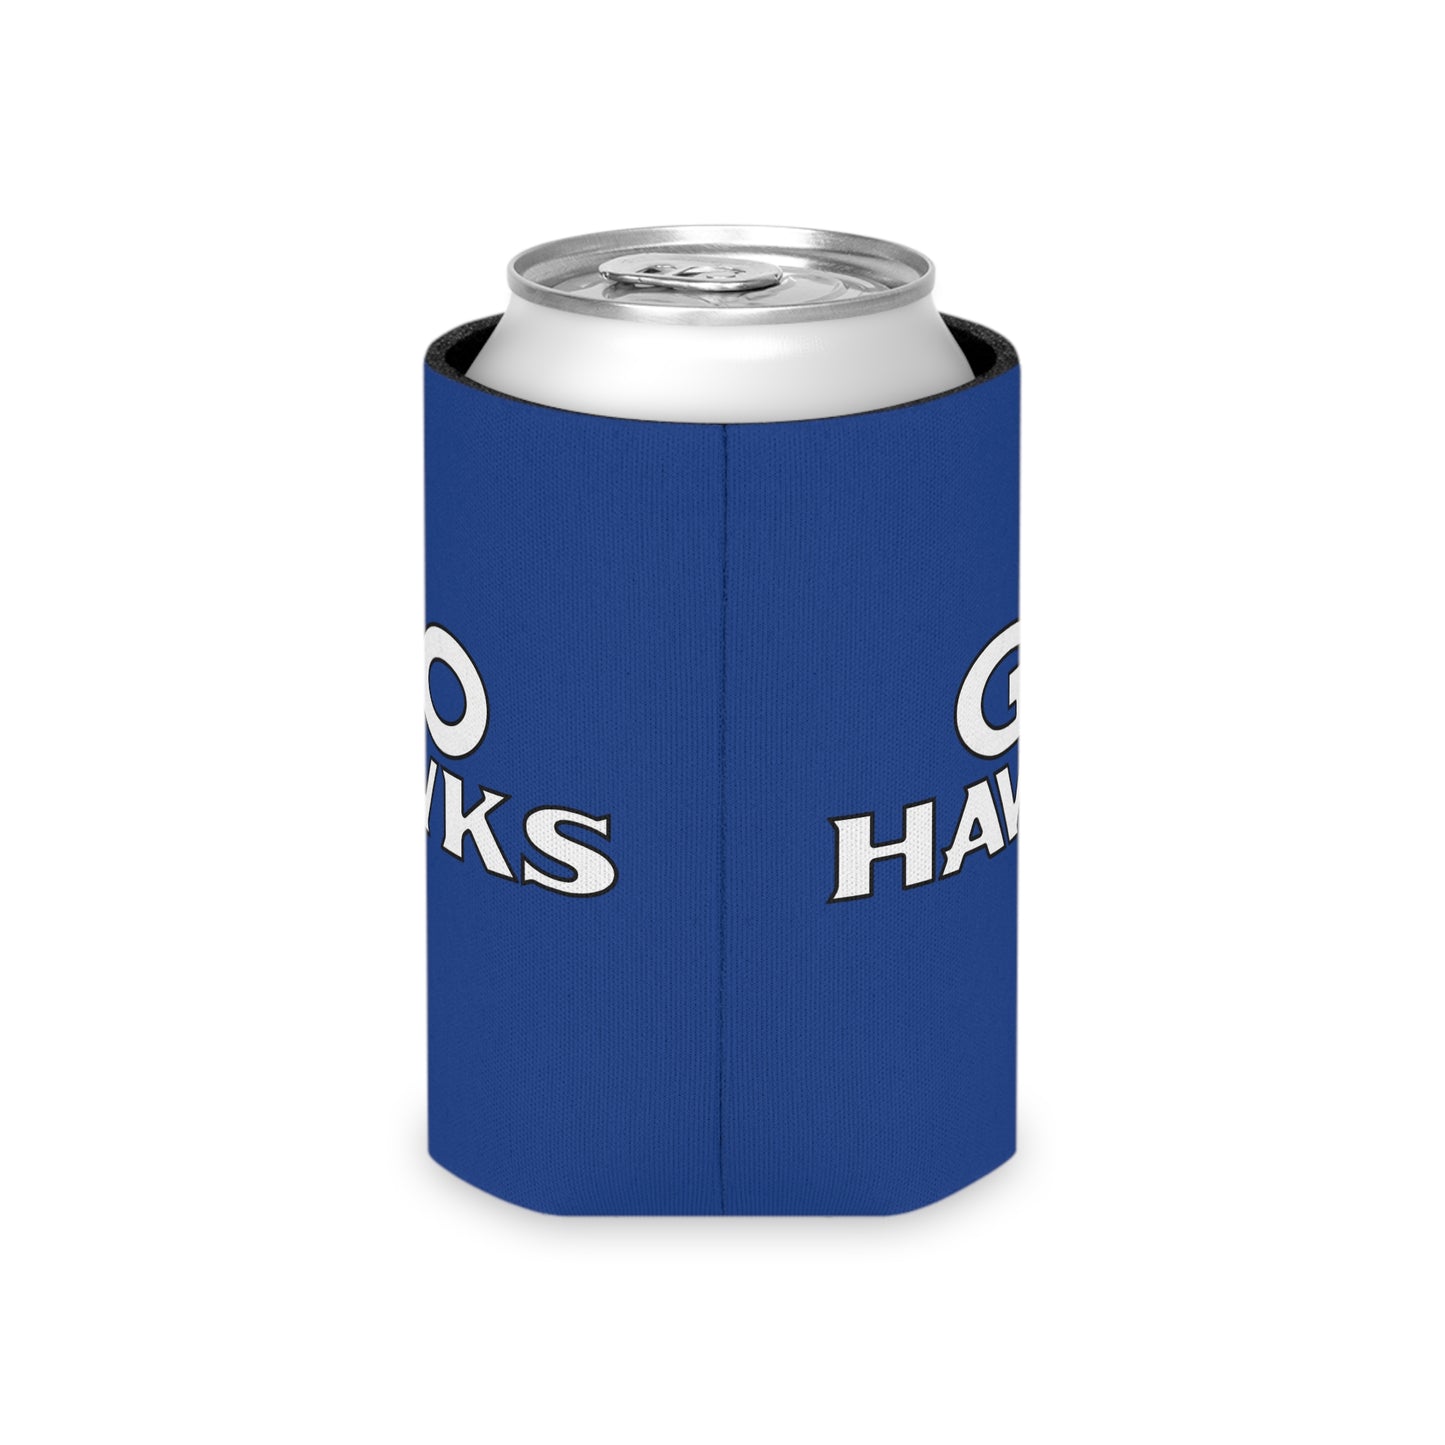 GO HAWKS Can Cooler